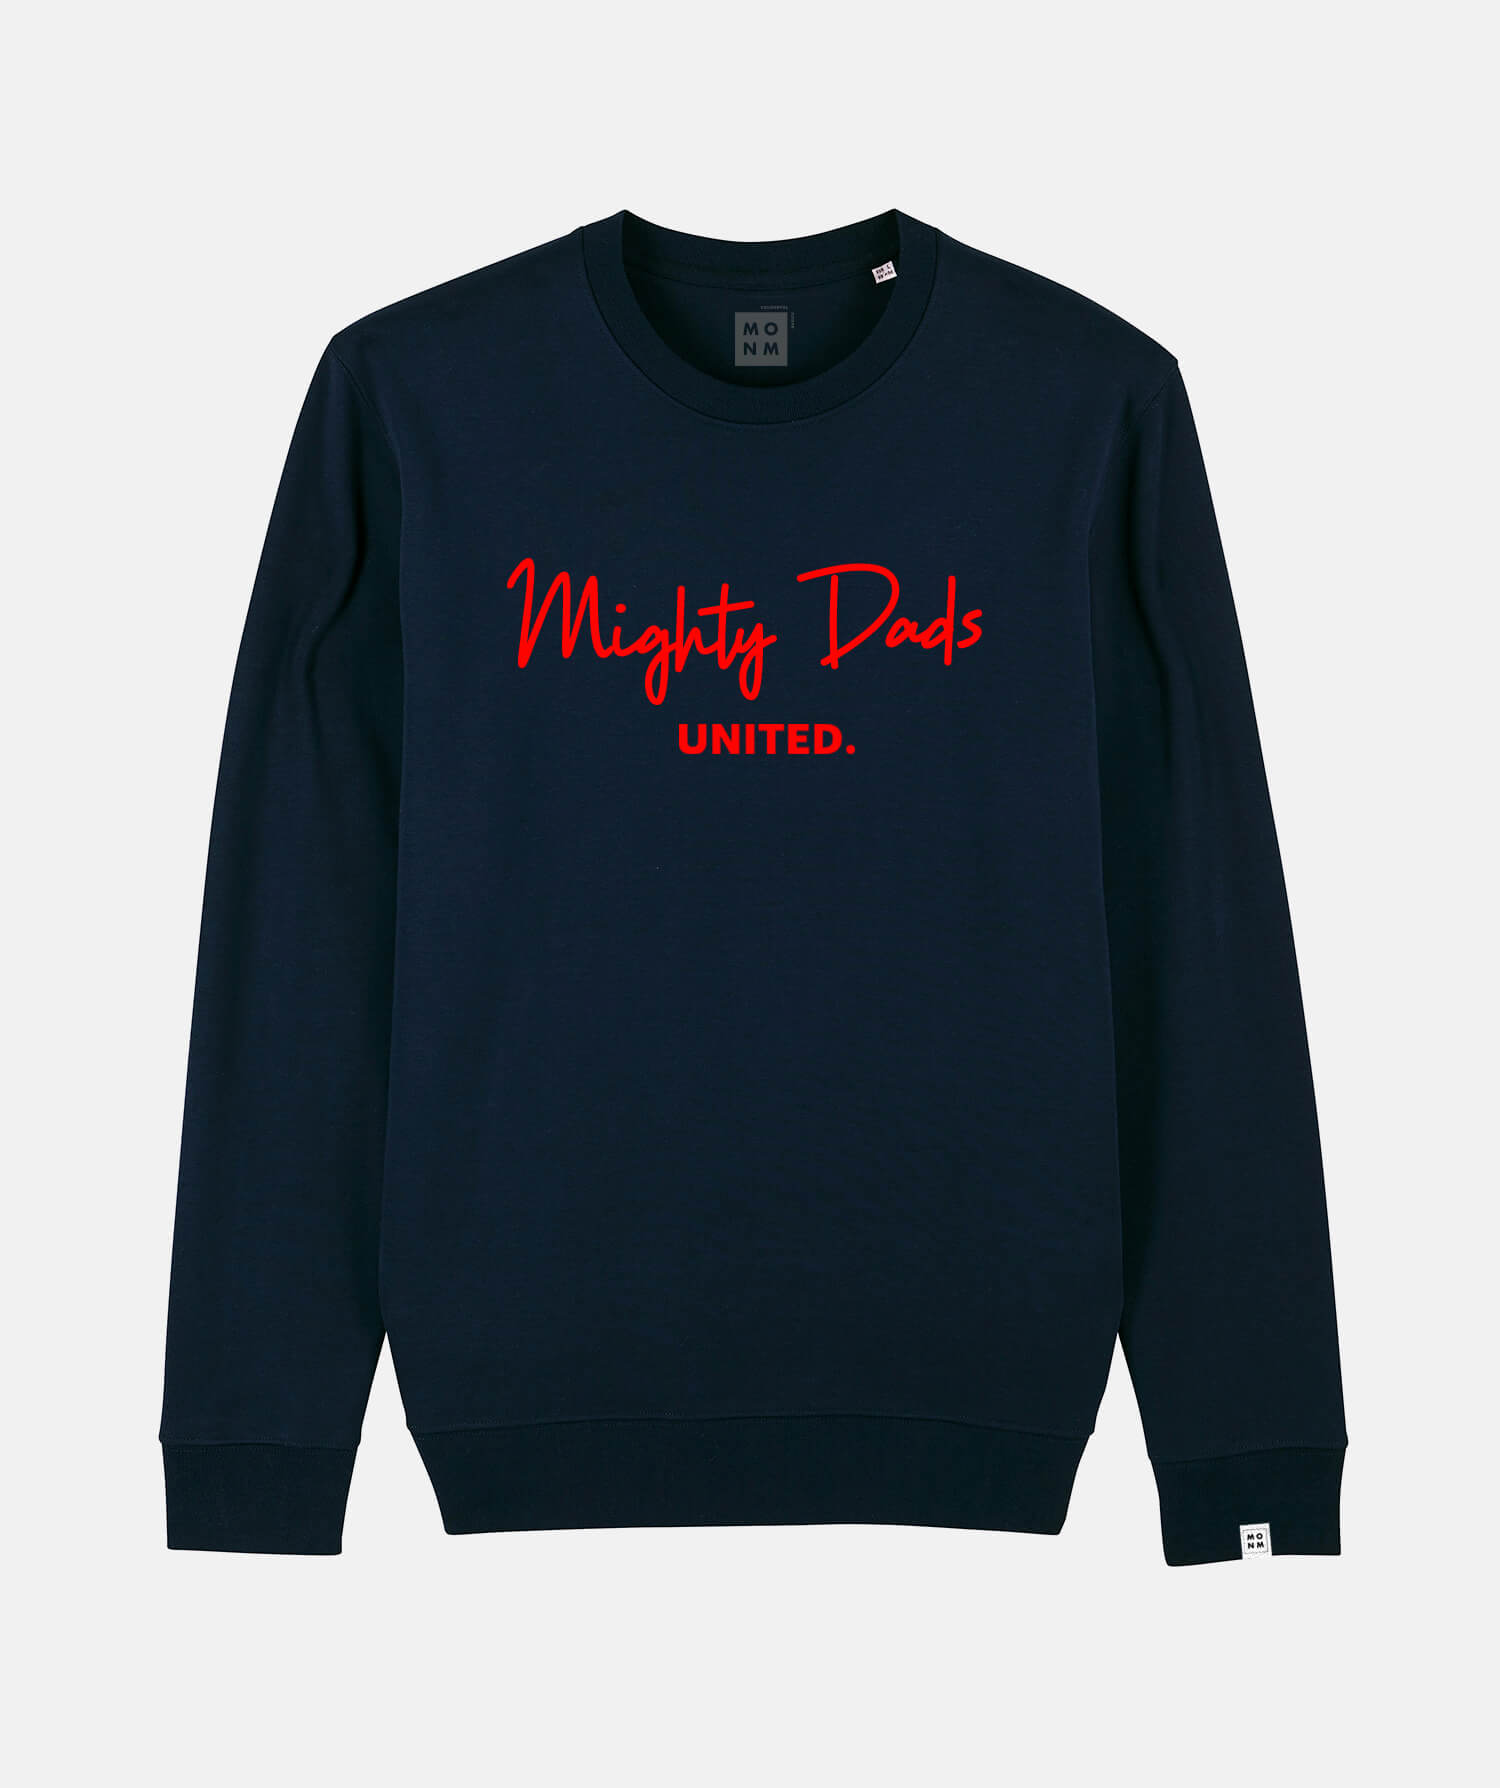 Mighty dads united sweater van Mangos on Monday